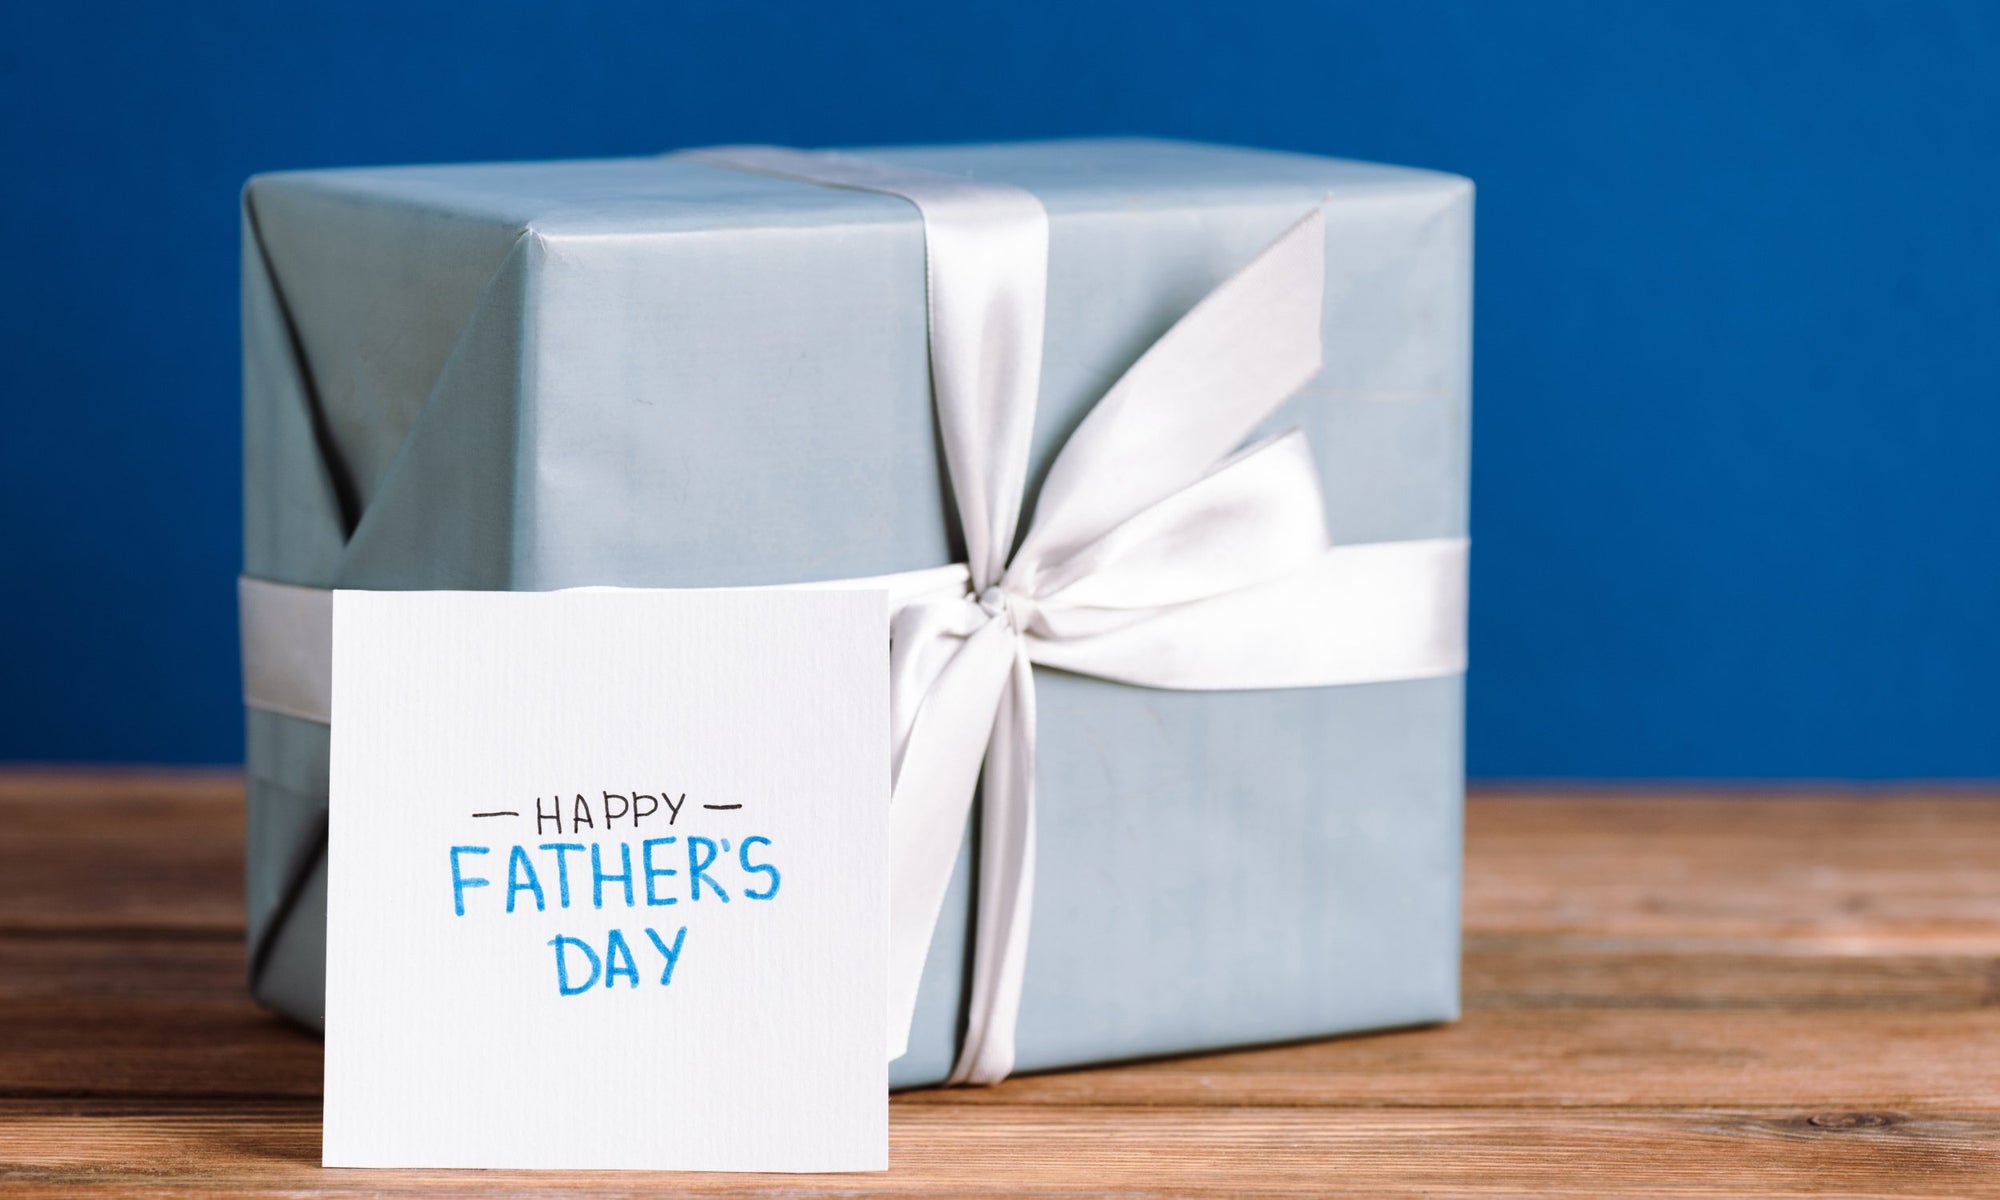 Best Father’s Day Gift Ideas for 2020